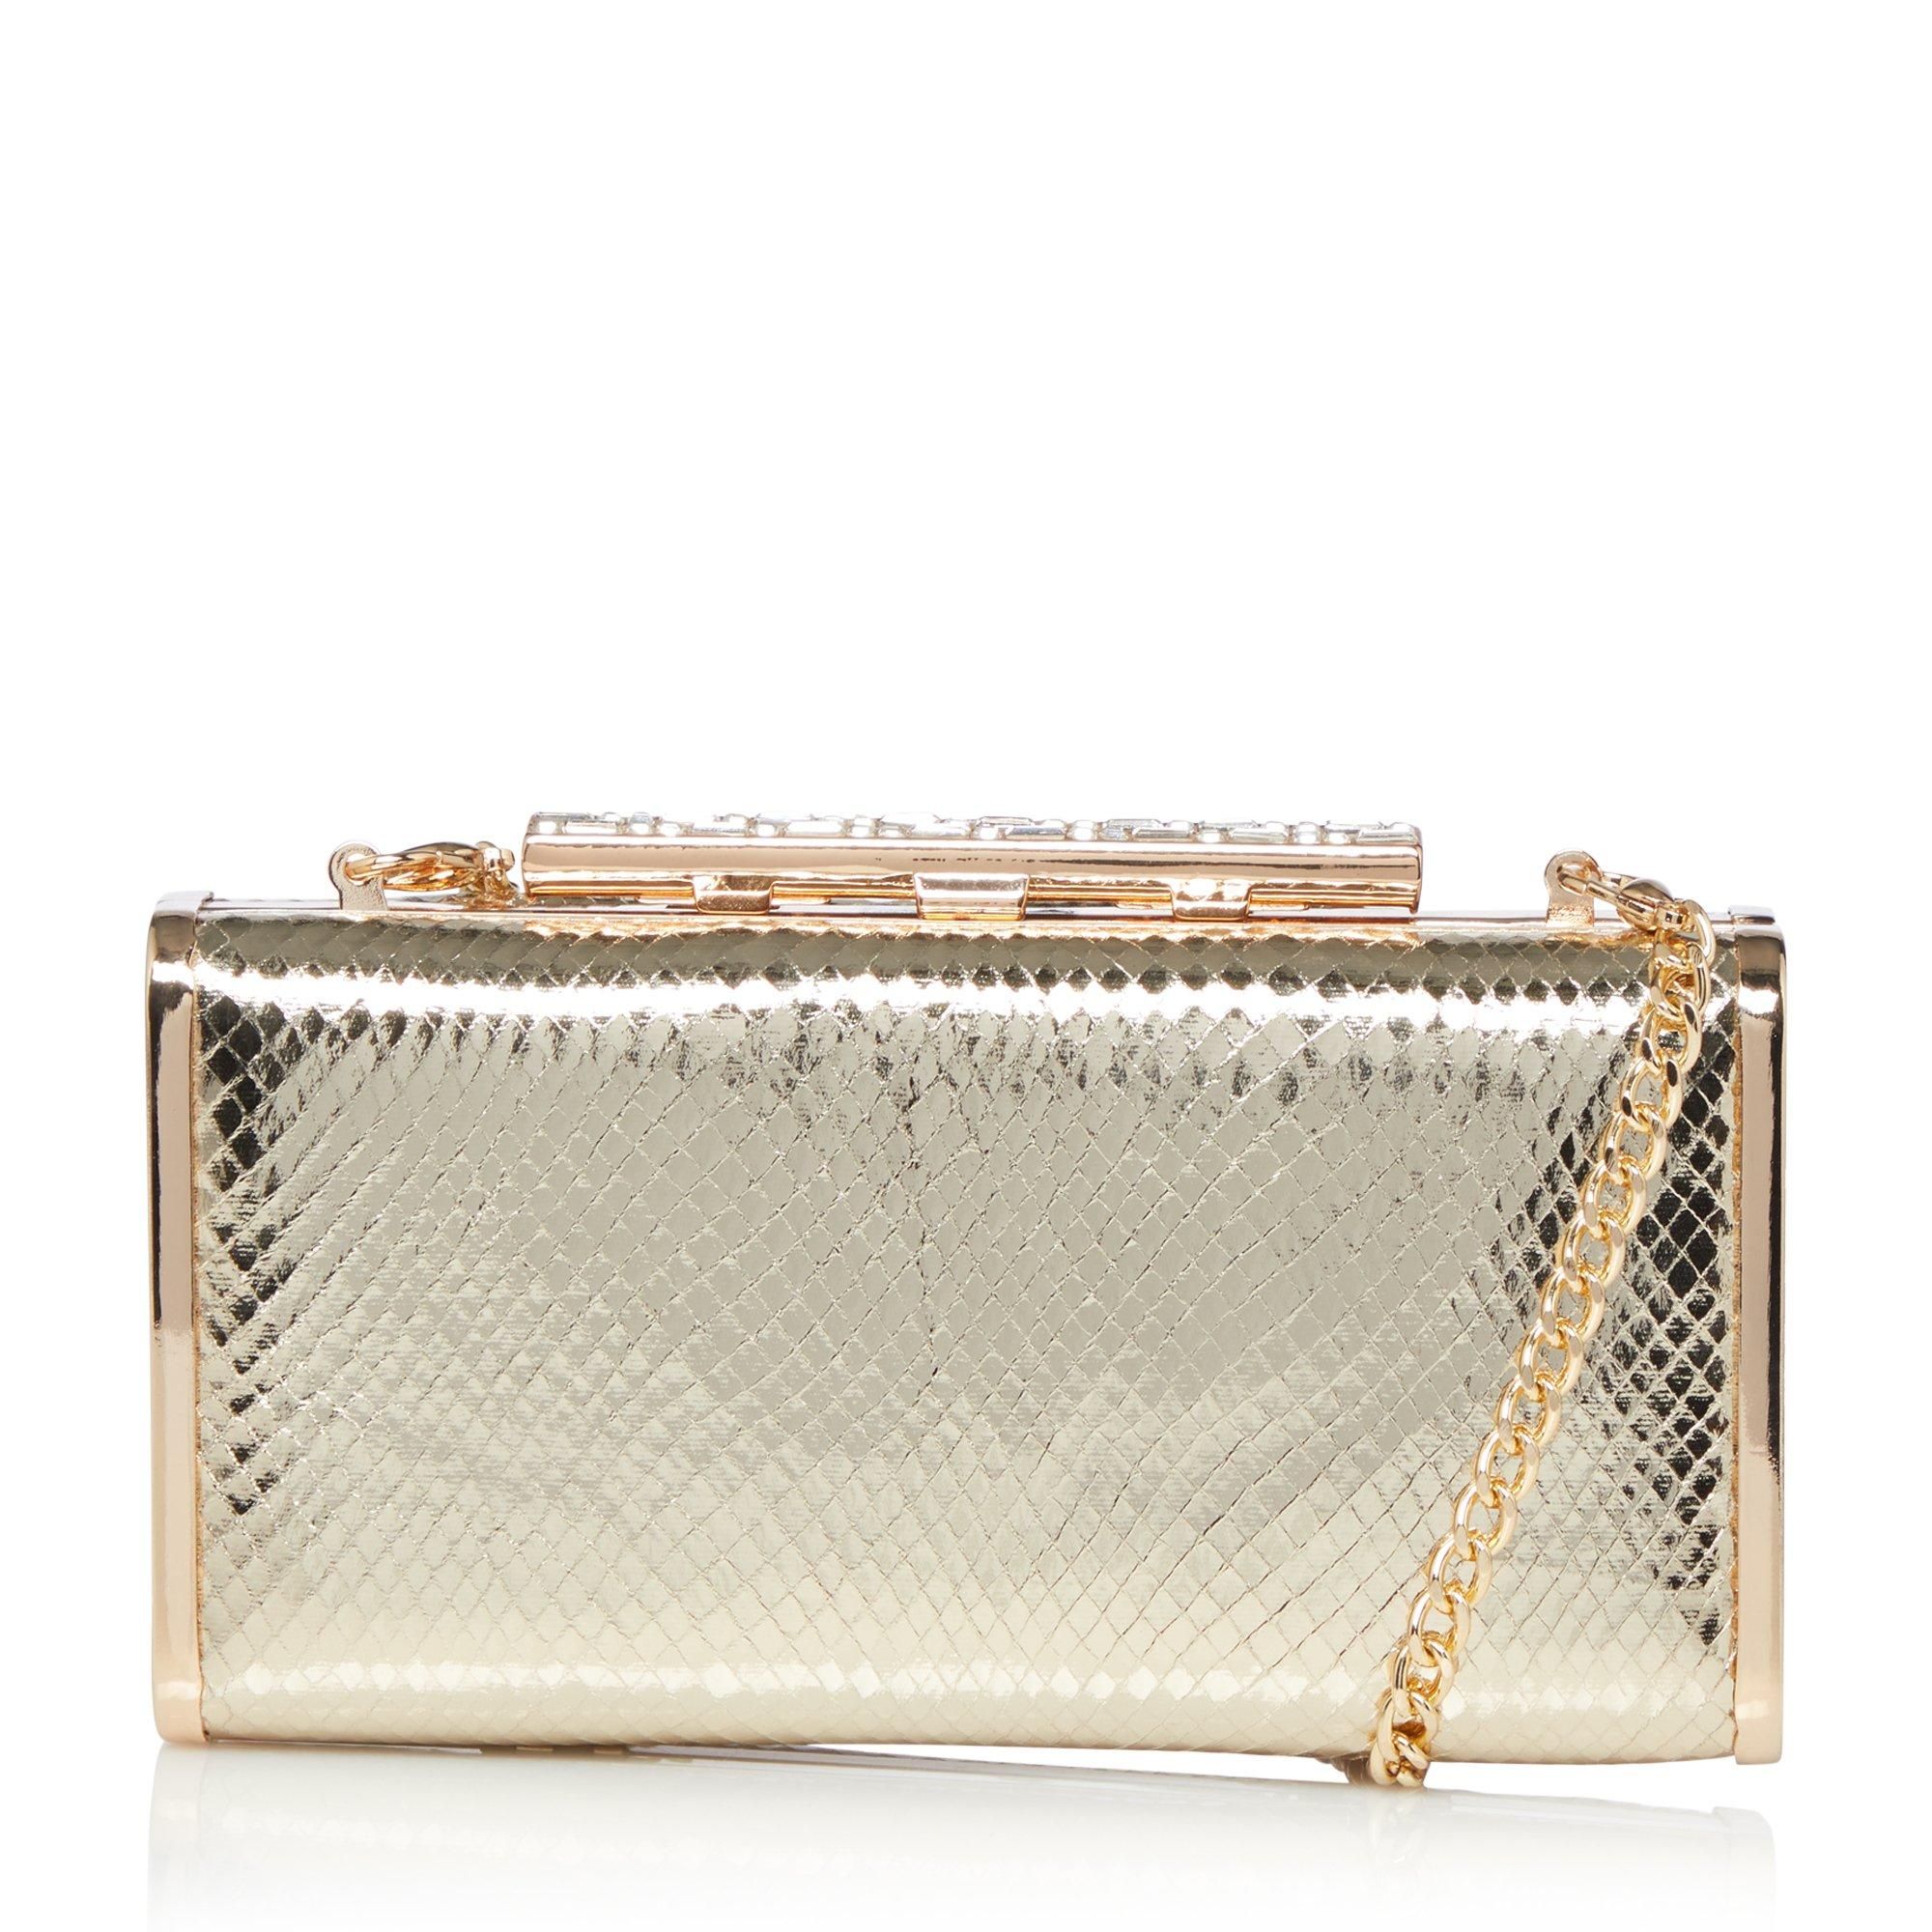 Your glamourous evening metallic box bag. Silver diamante detail clasp opening. Finished with a gold shoulder carry strap.